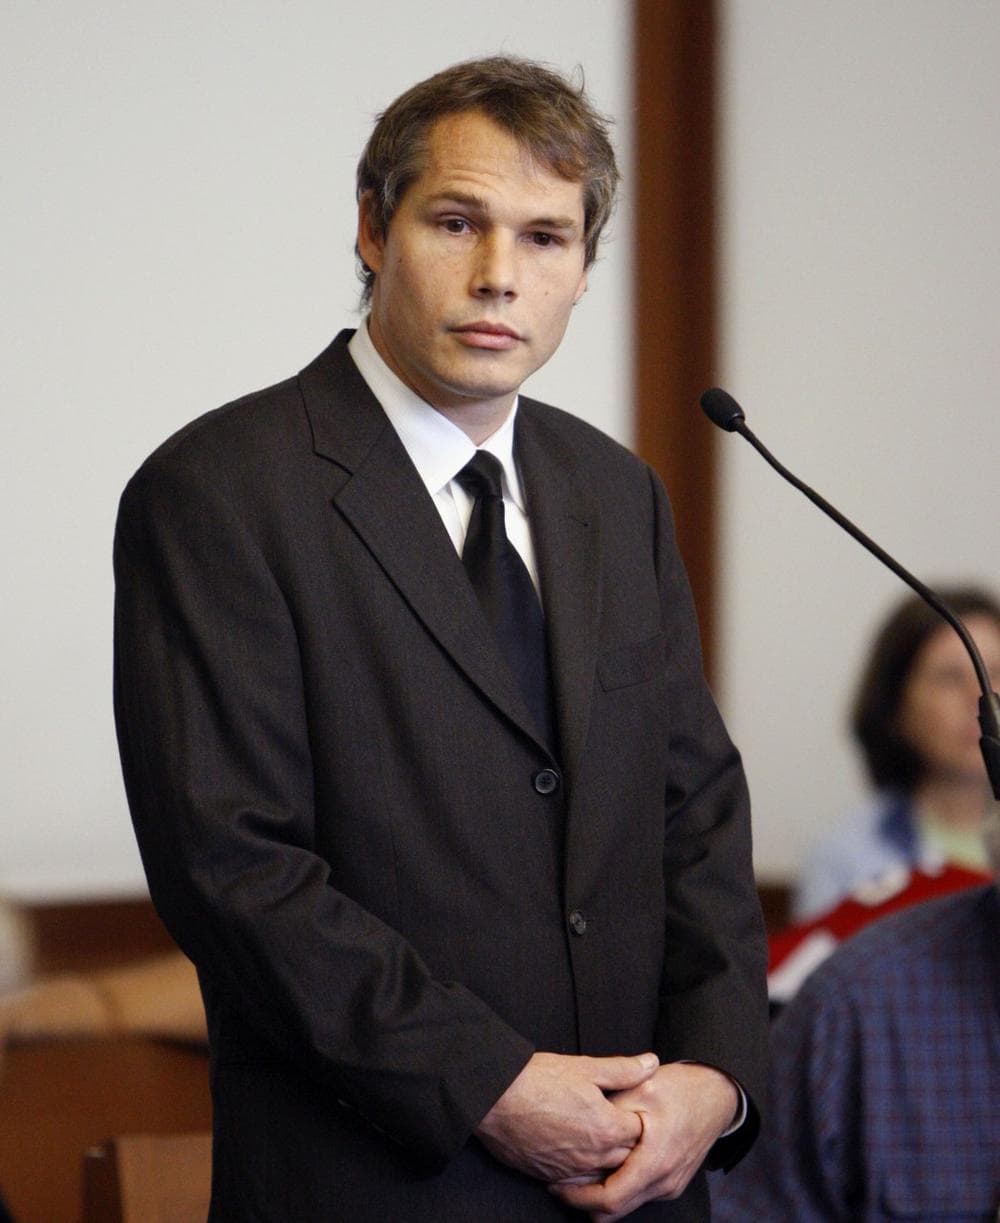 Artist Shepard Fairey stands in Boston Municipal Court on Friday during a status hearing in connections with 13 vandalism charges around Boston. (AP Photo)